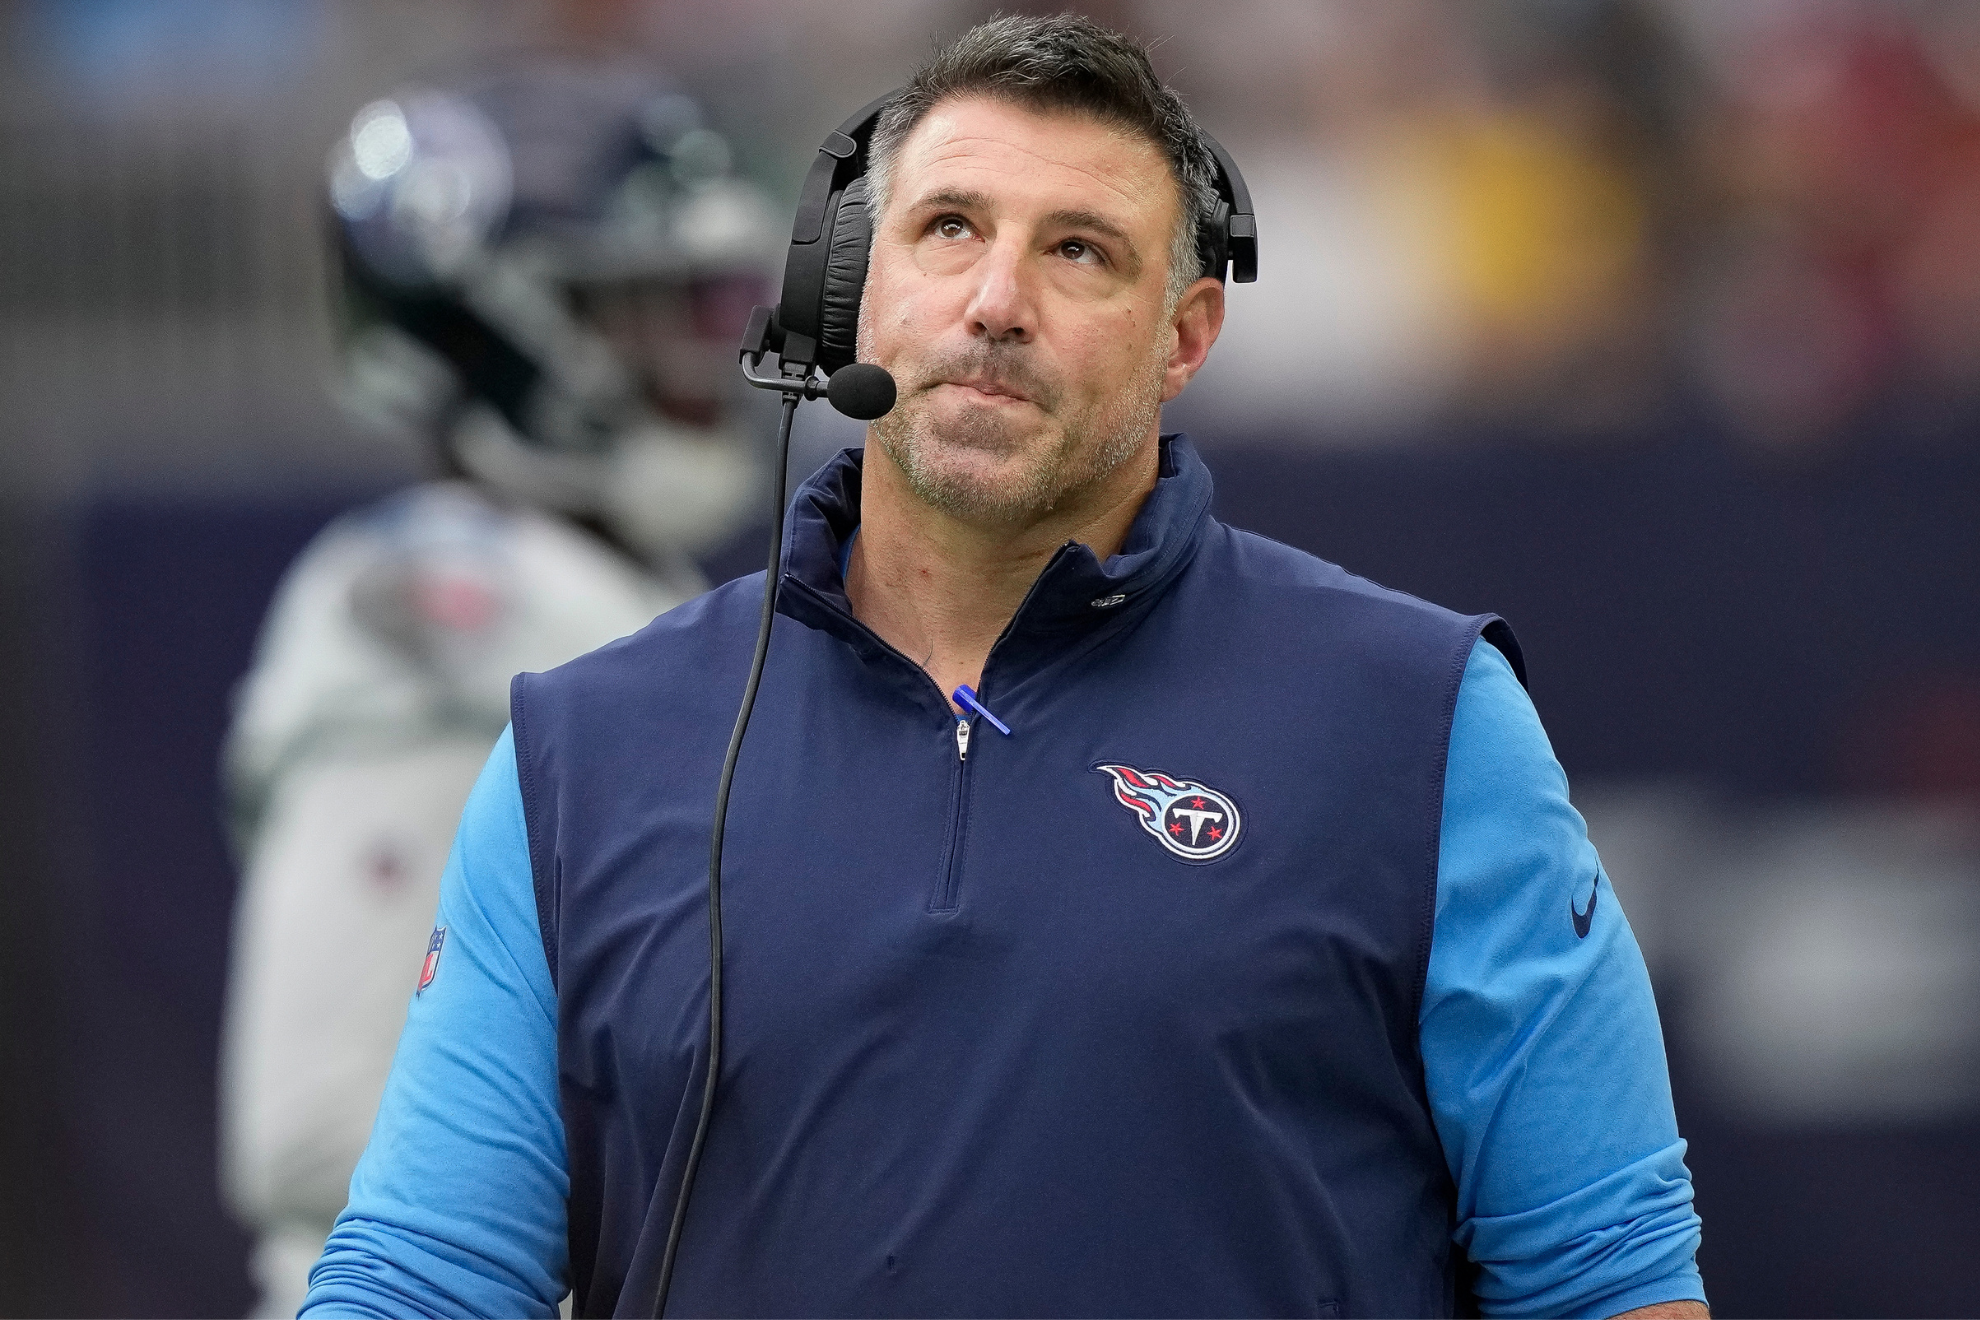 Vrabel, the 2021 Coach of the Year, was fired on Tuesday.